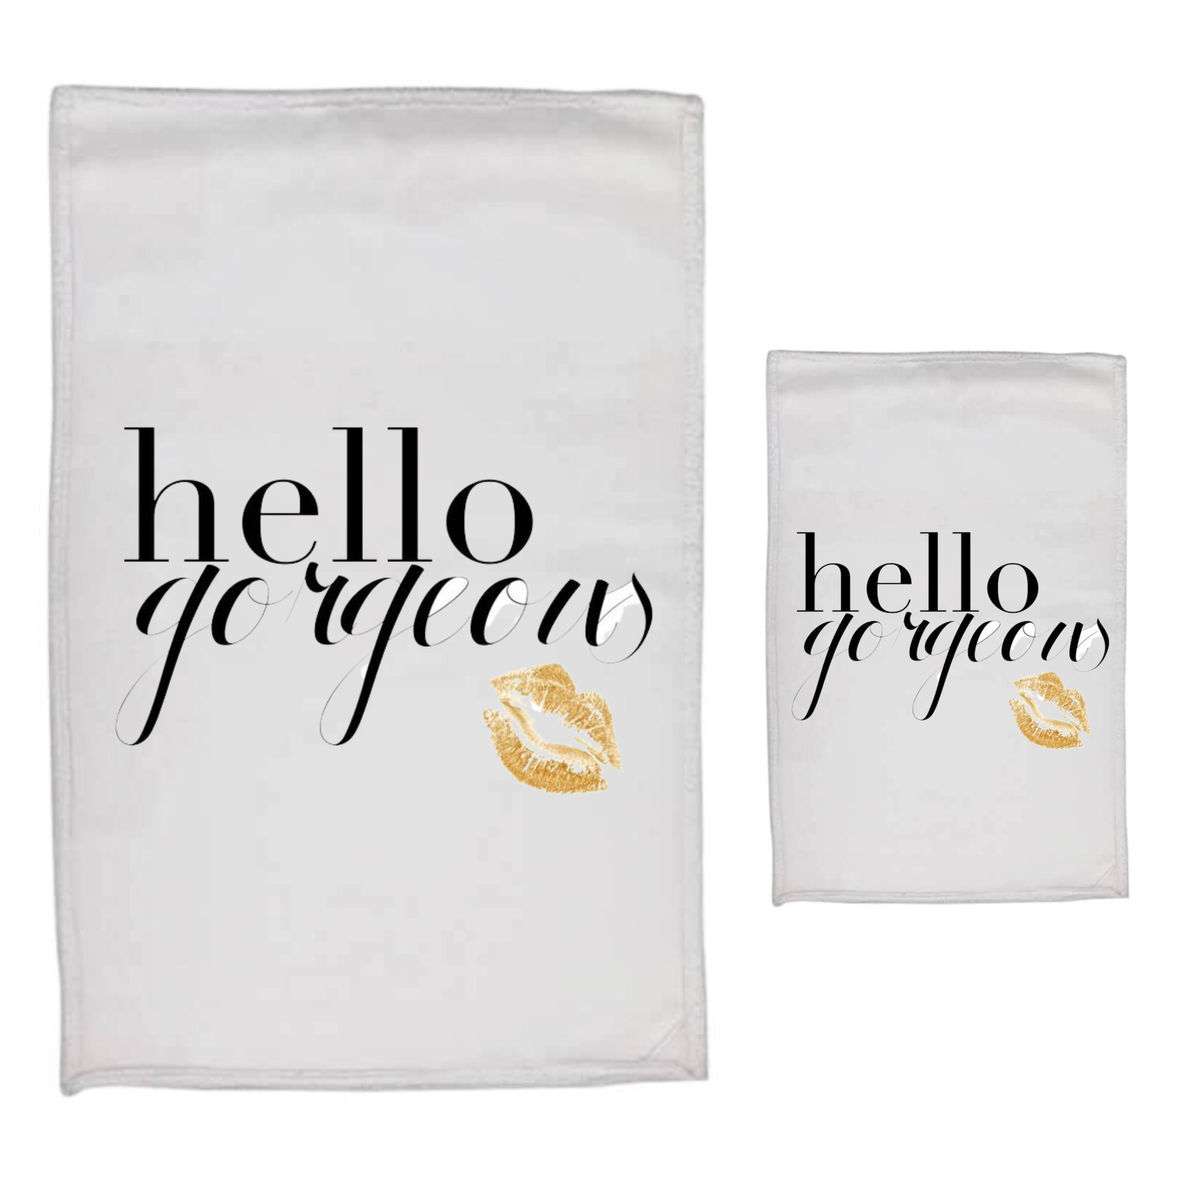 Hello gorgeous - White Polyester Hand & Face Towel